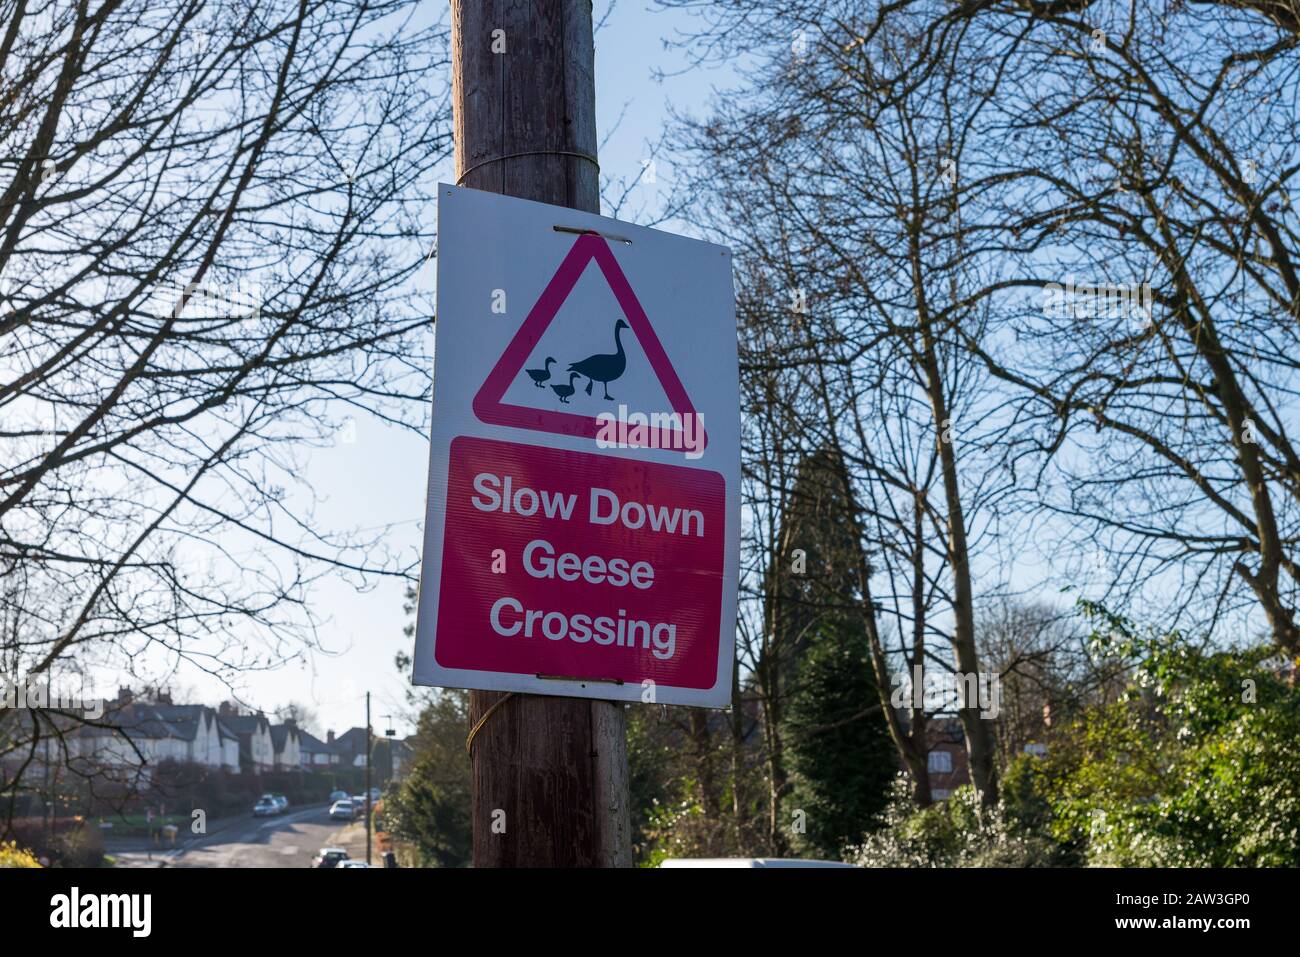 The Moor Pool Estate is a garden suburb in Harborne, Birmingham and is a conservation area.Sign saying 'slow down - geese crossing' Stock Photo